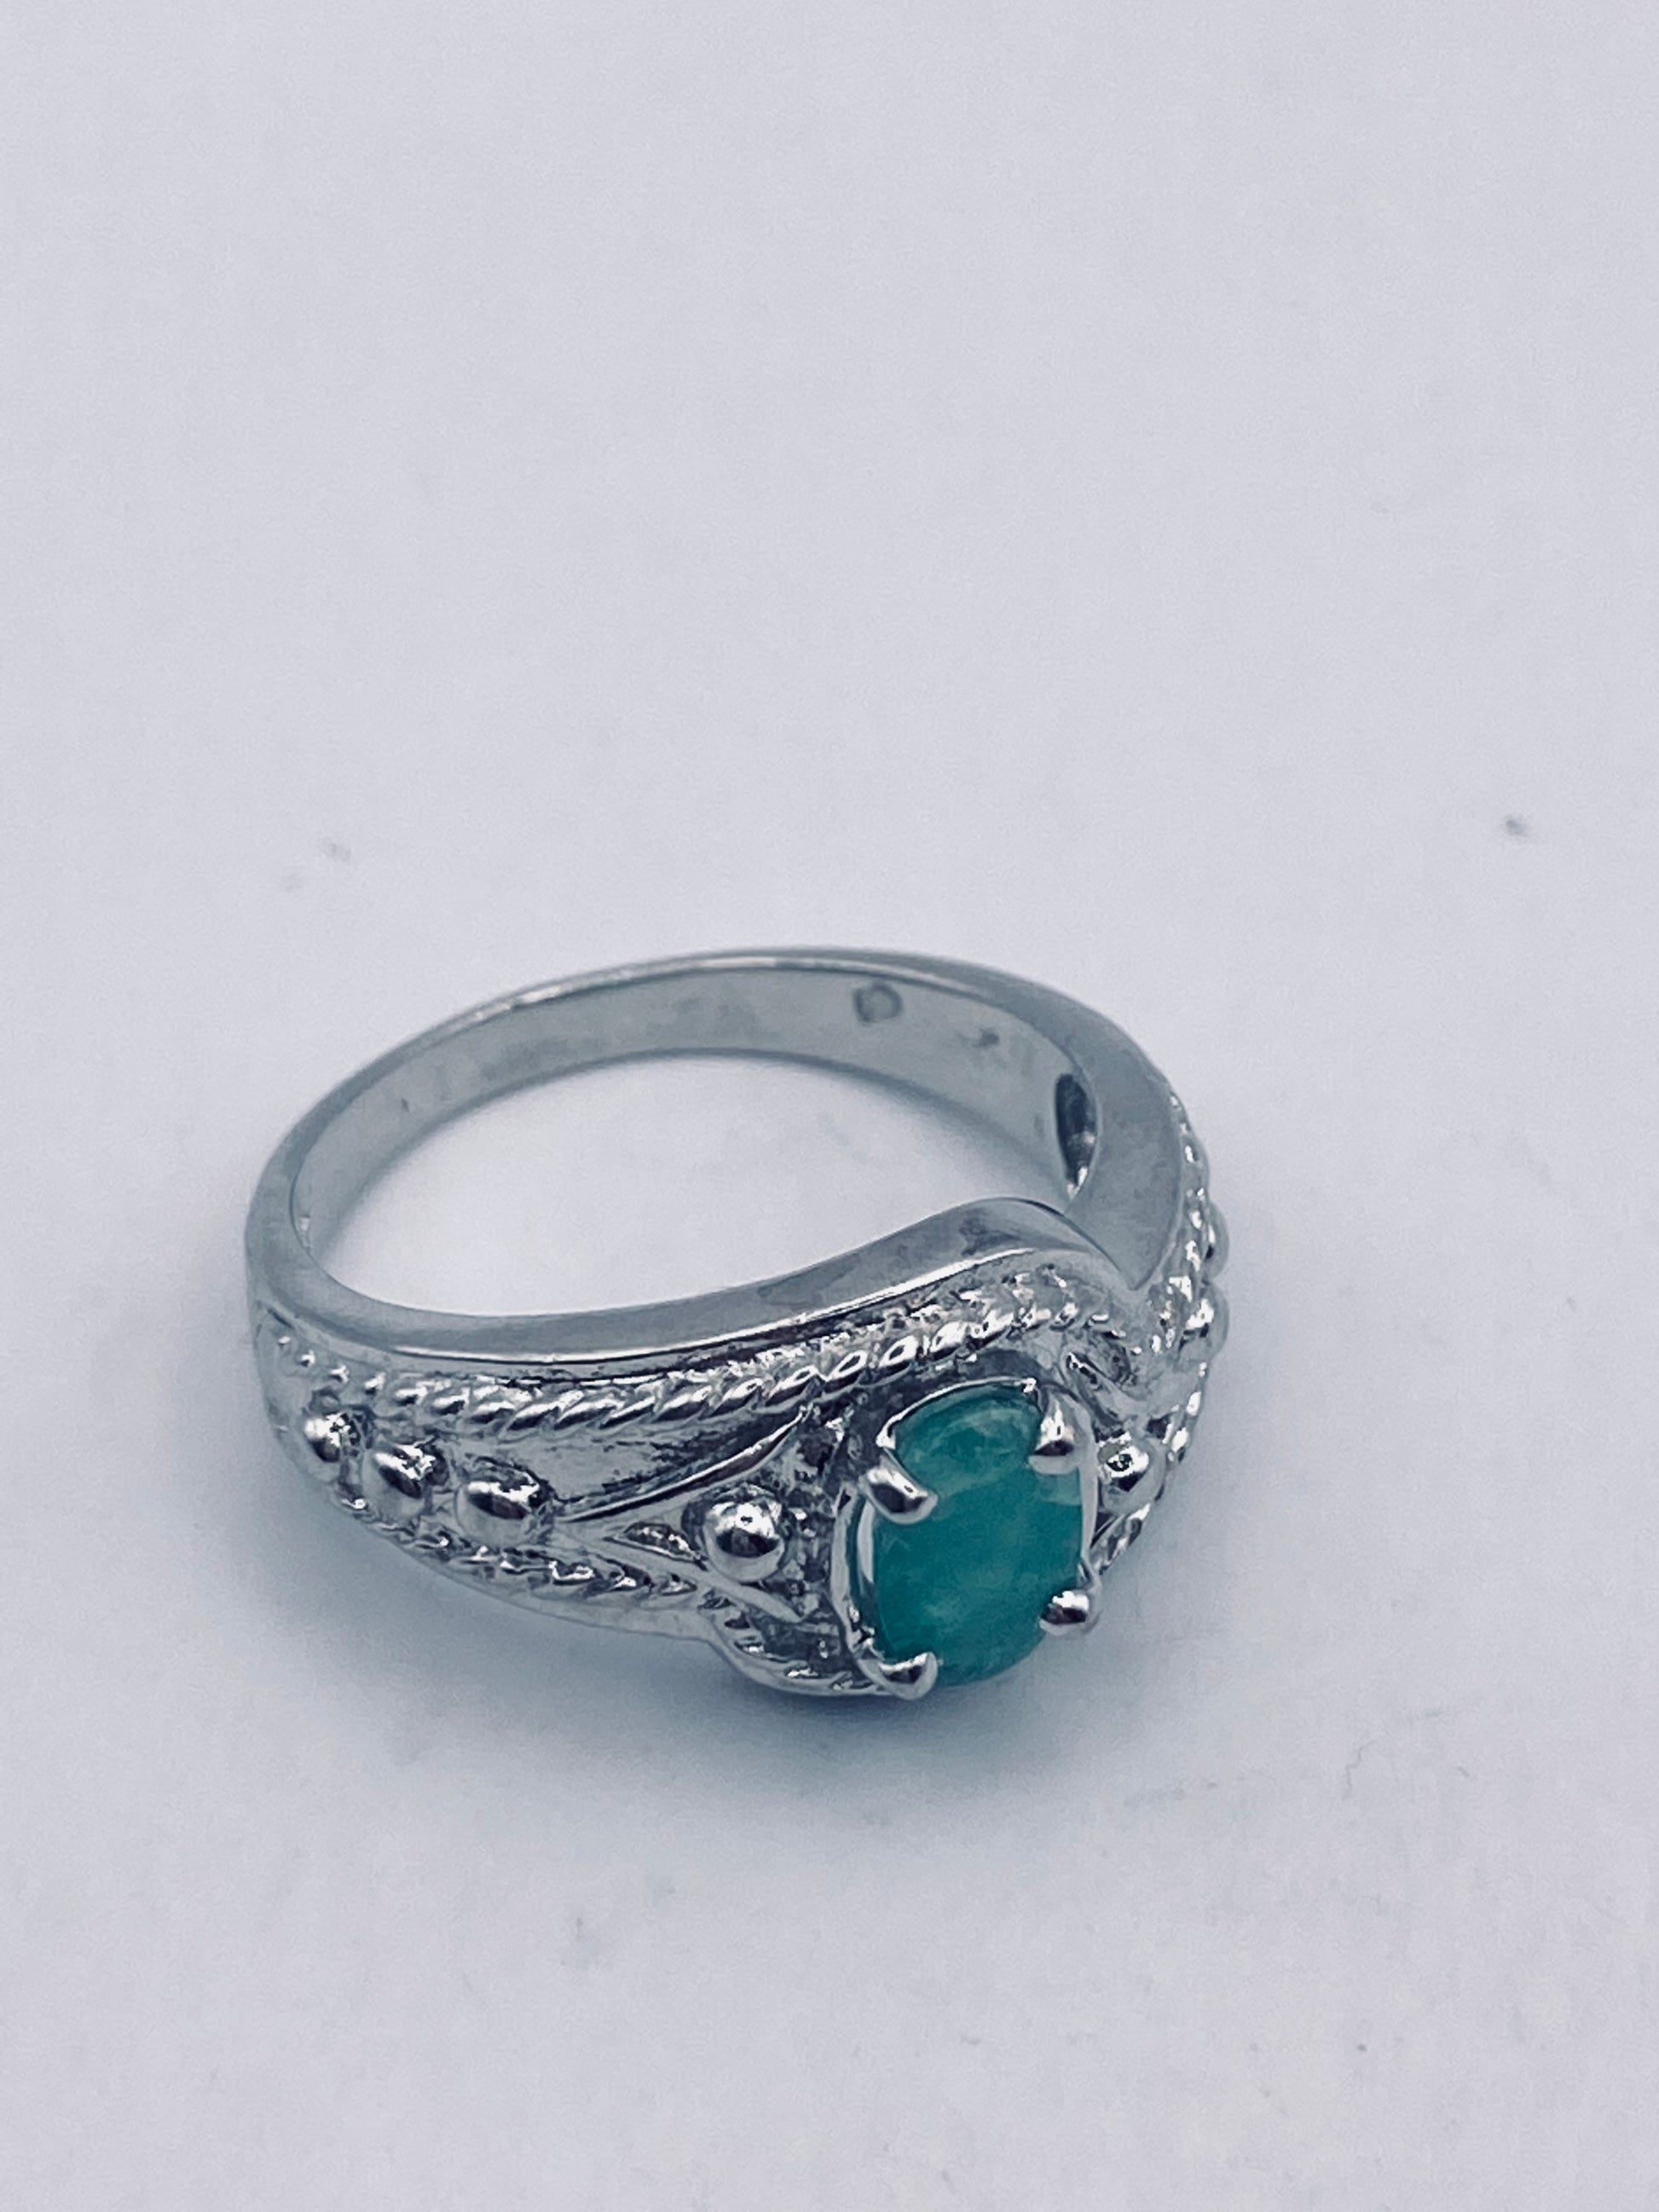 Vintage Green Emerald 925 Sterling Silver Ring Size 8